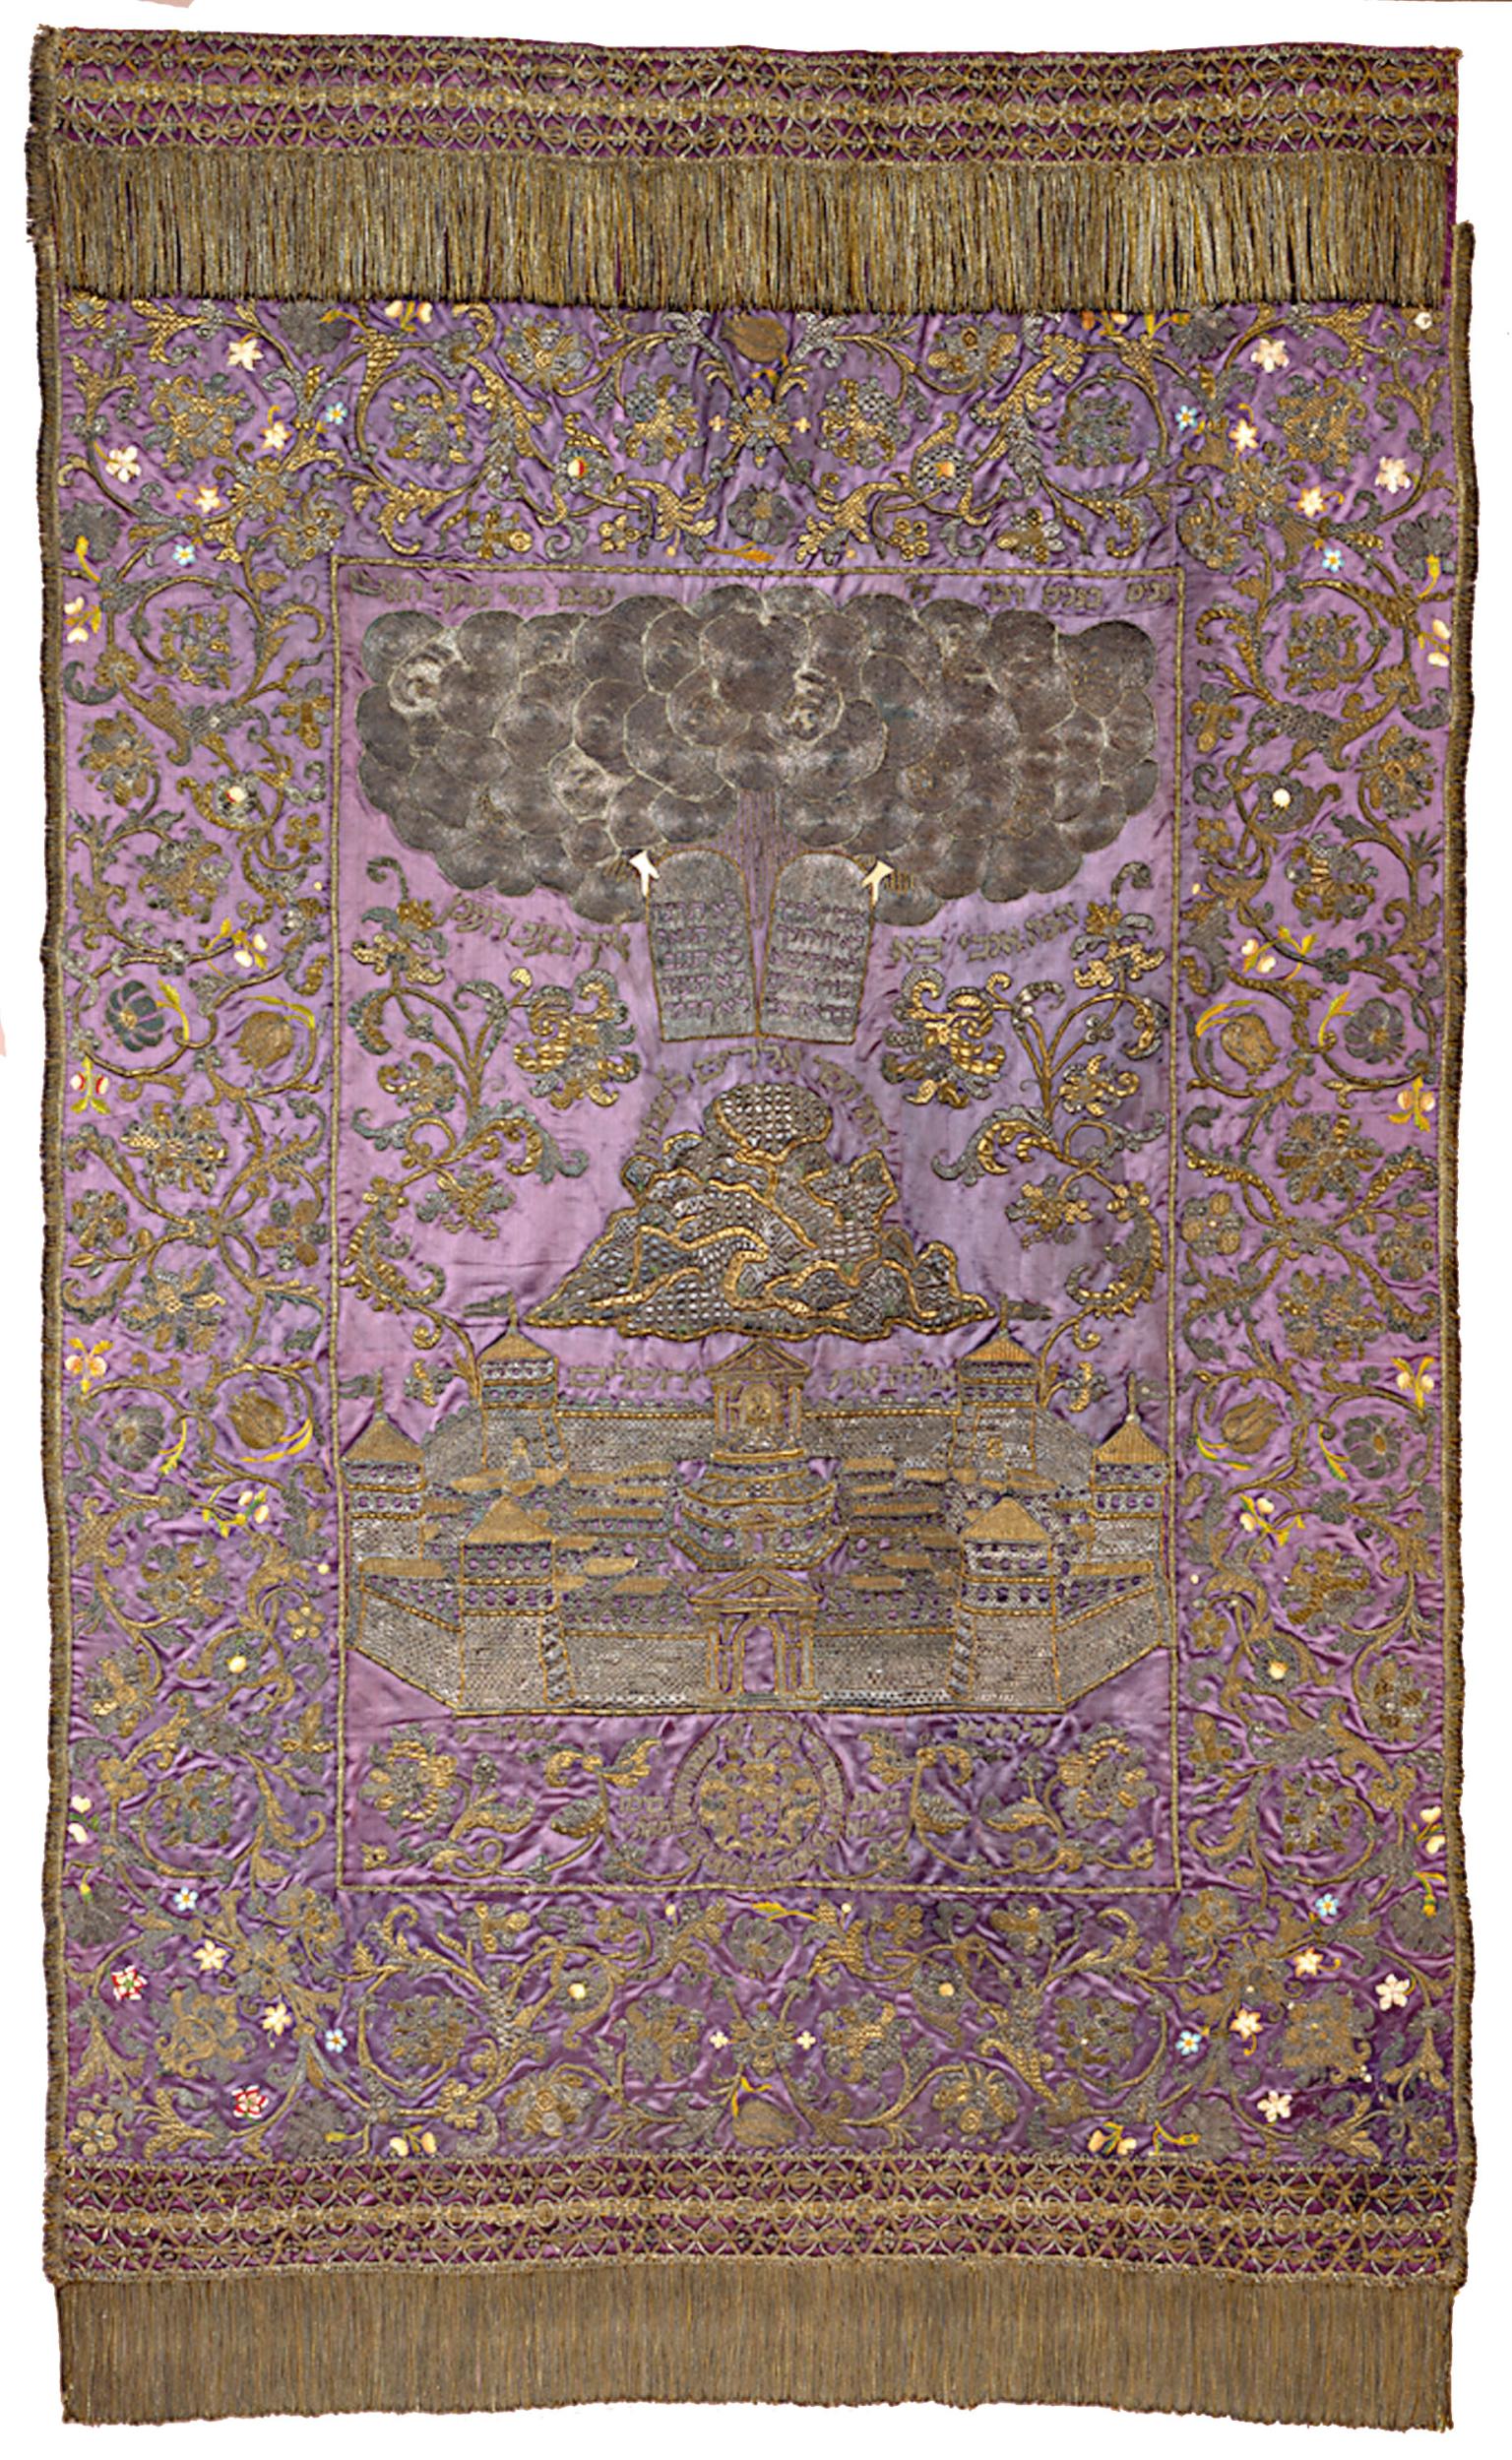 Cloth with embroidered image of tablets in clouds above mountain and city. 